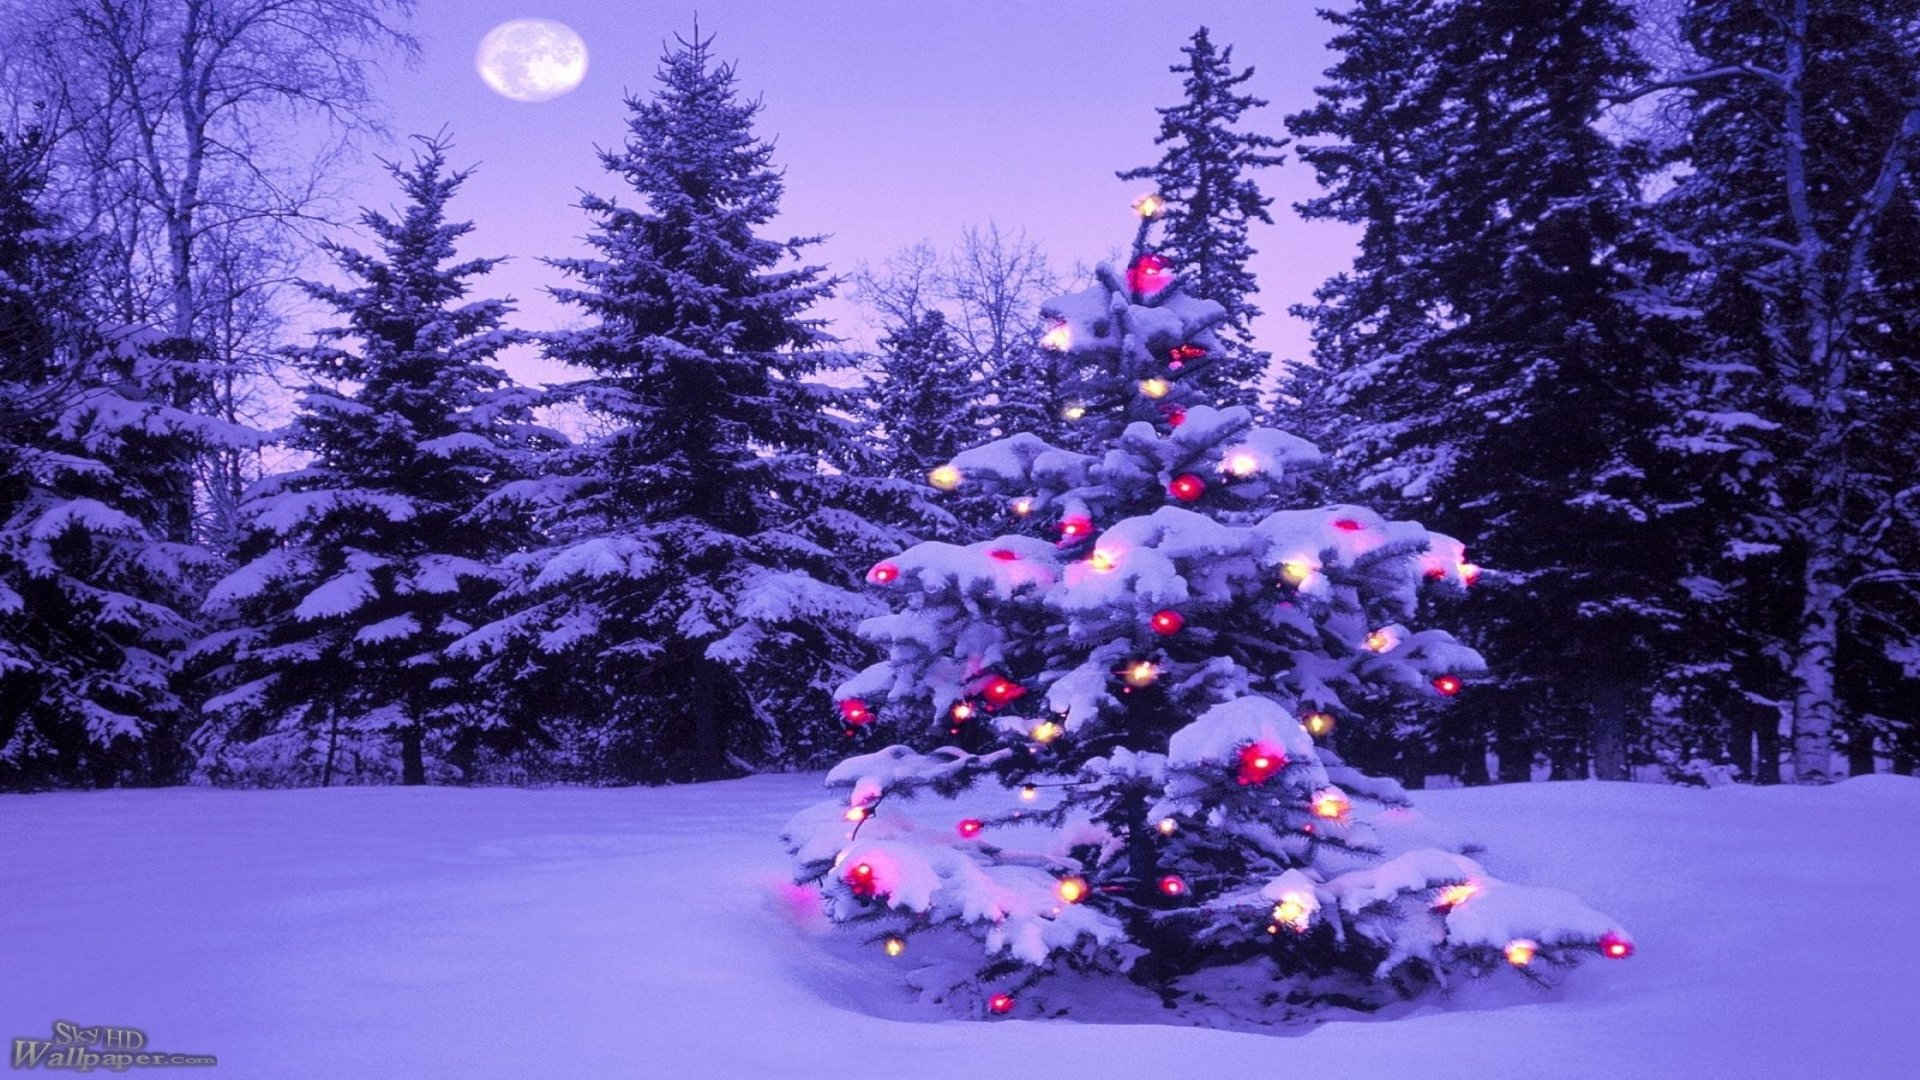 Lighted Christmas Tree in Winter Forest HD Wallpaper